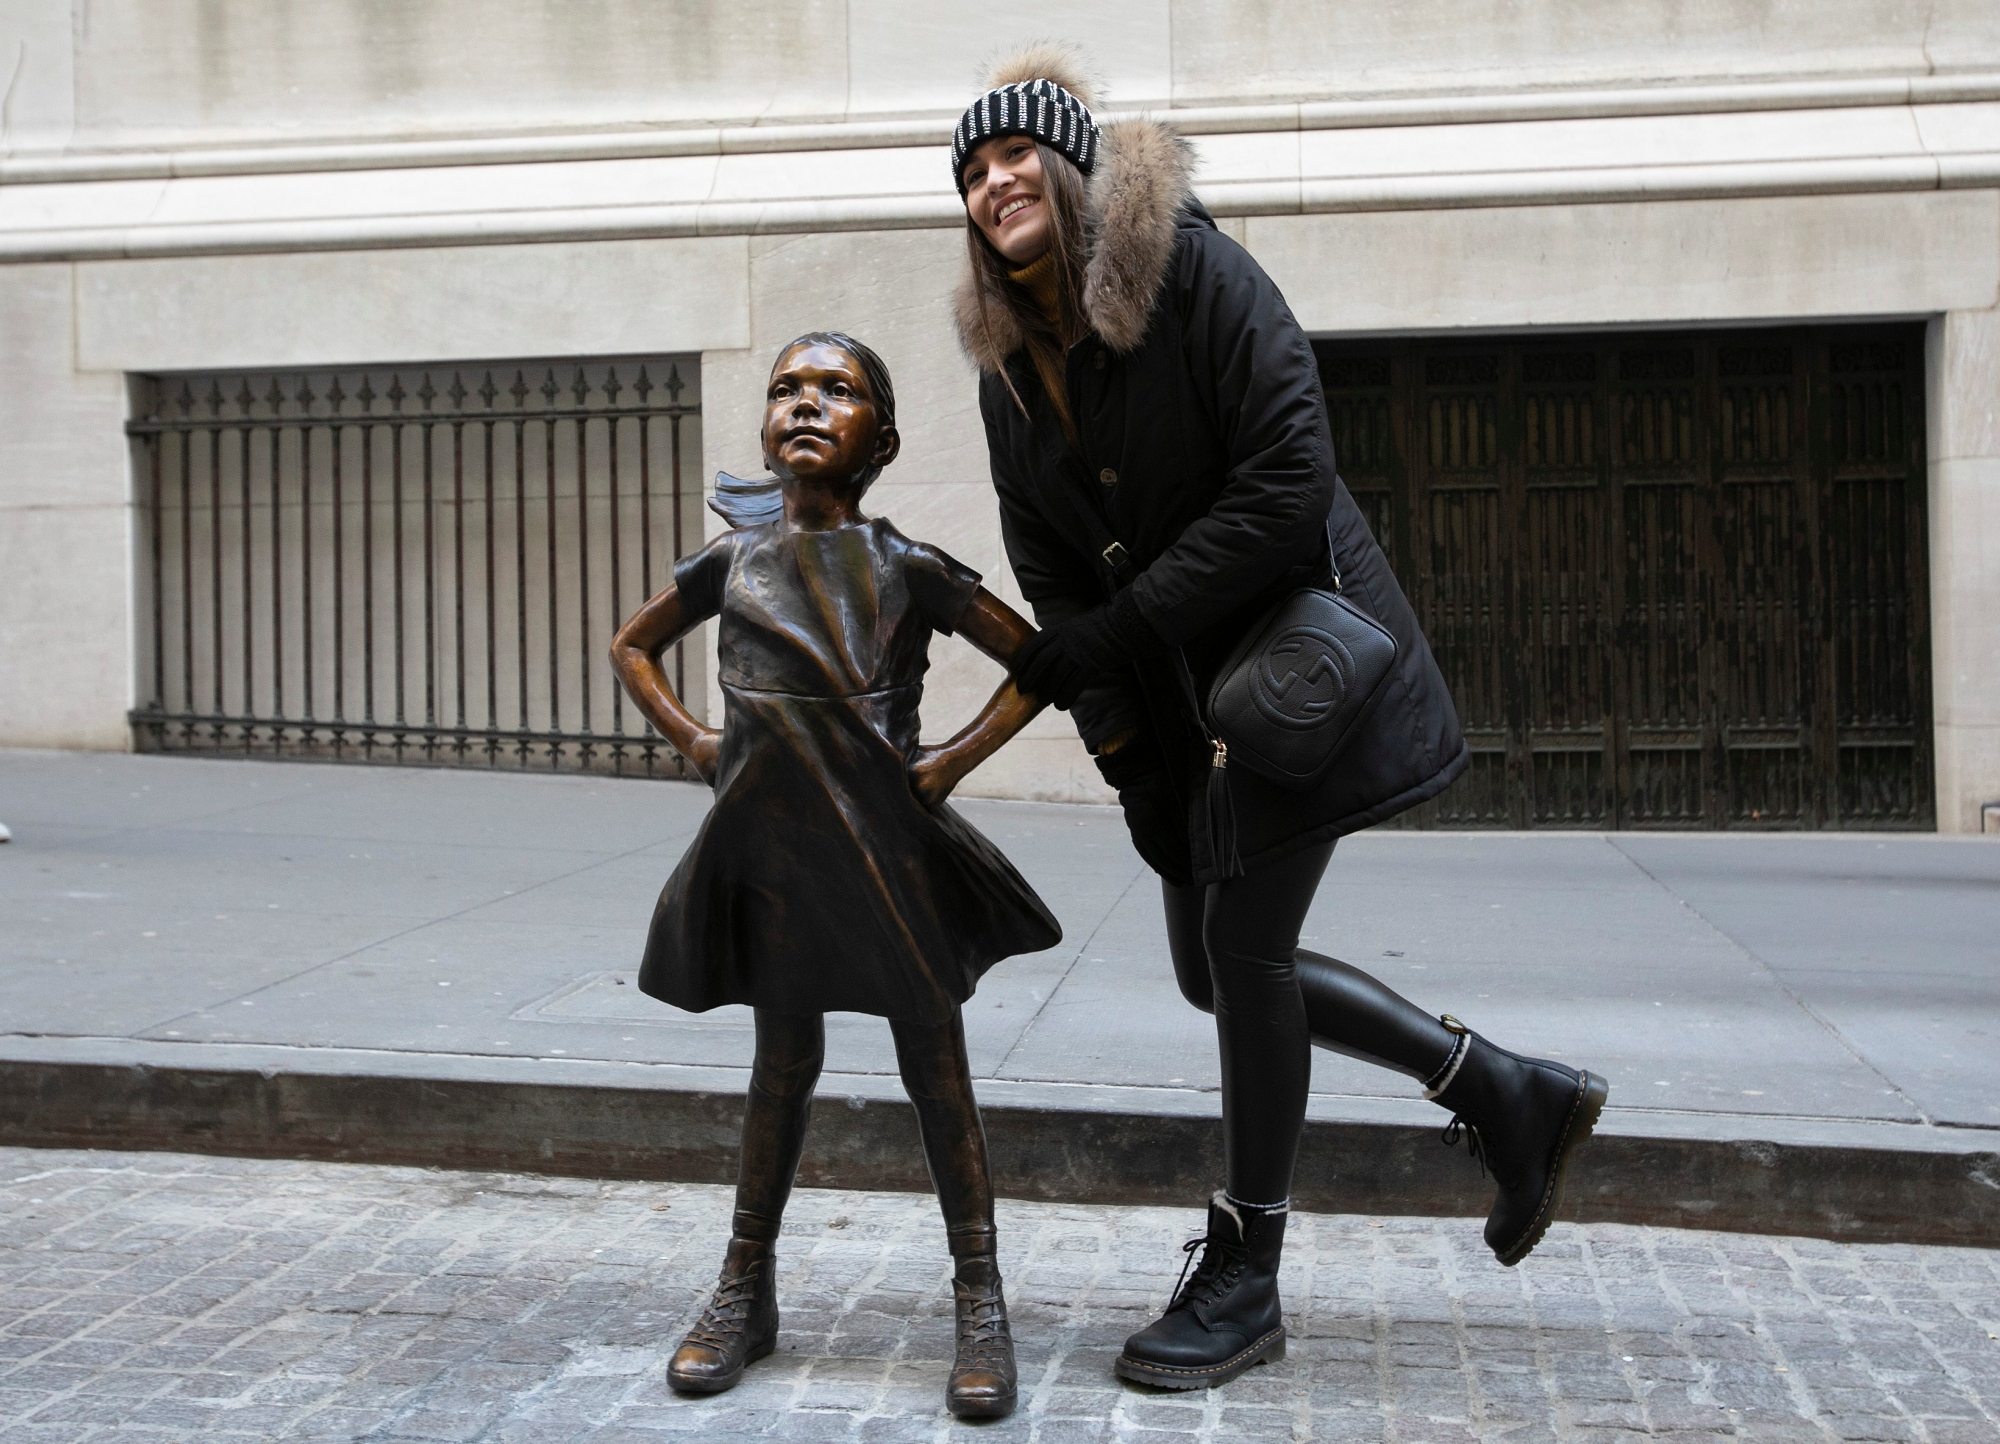 A woman poses with the "Fearless Girl" statue after it is unveiled at its new location in front of the New York Stock Exchange, Monday, Dec. 10, 2018, in New York. The statue, considered by many to symbolize female empowerment, was previously located near the Charging Bull statue on lower Broadway. (AP Photo/Mark Lennihan) FEARLESS GIRL